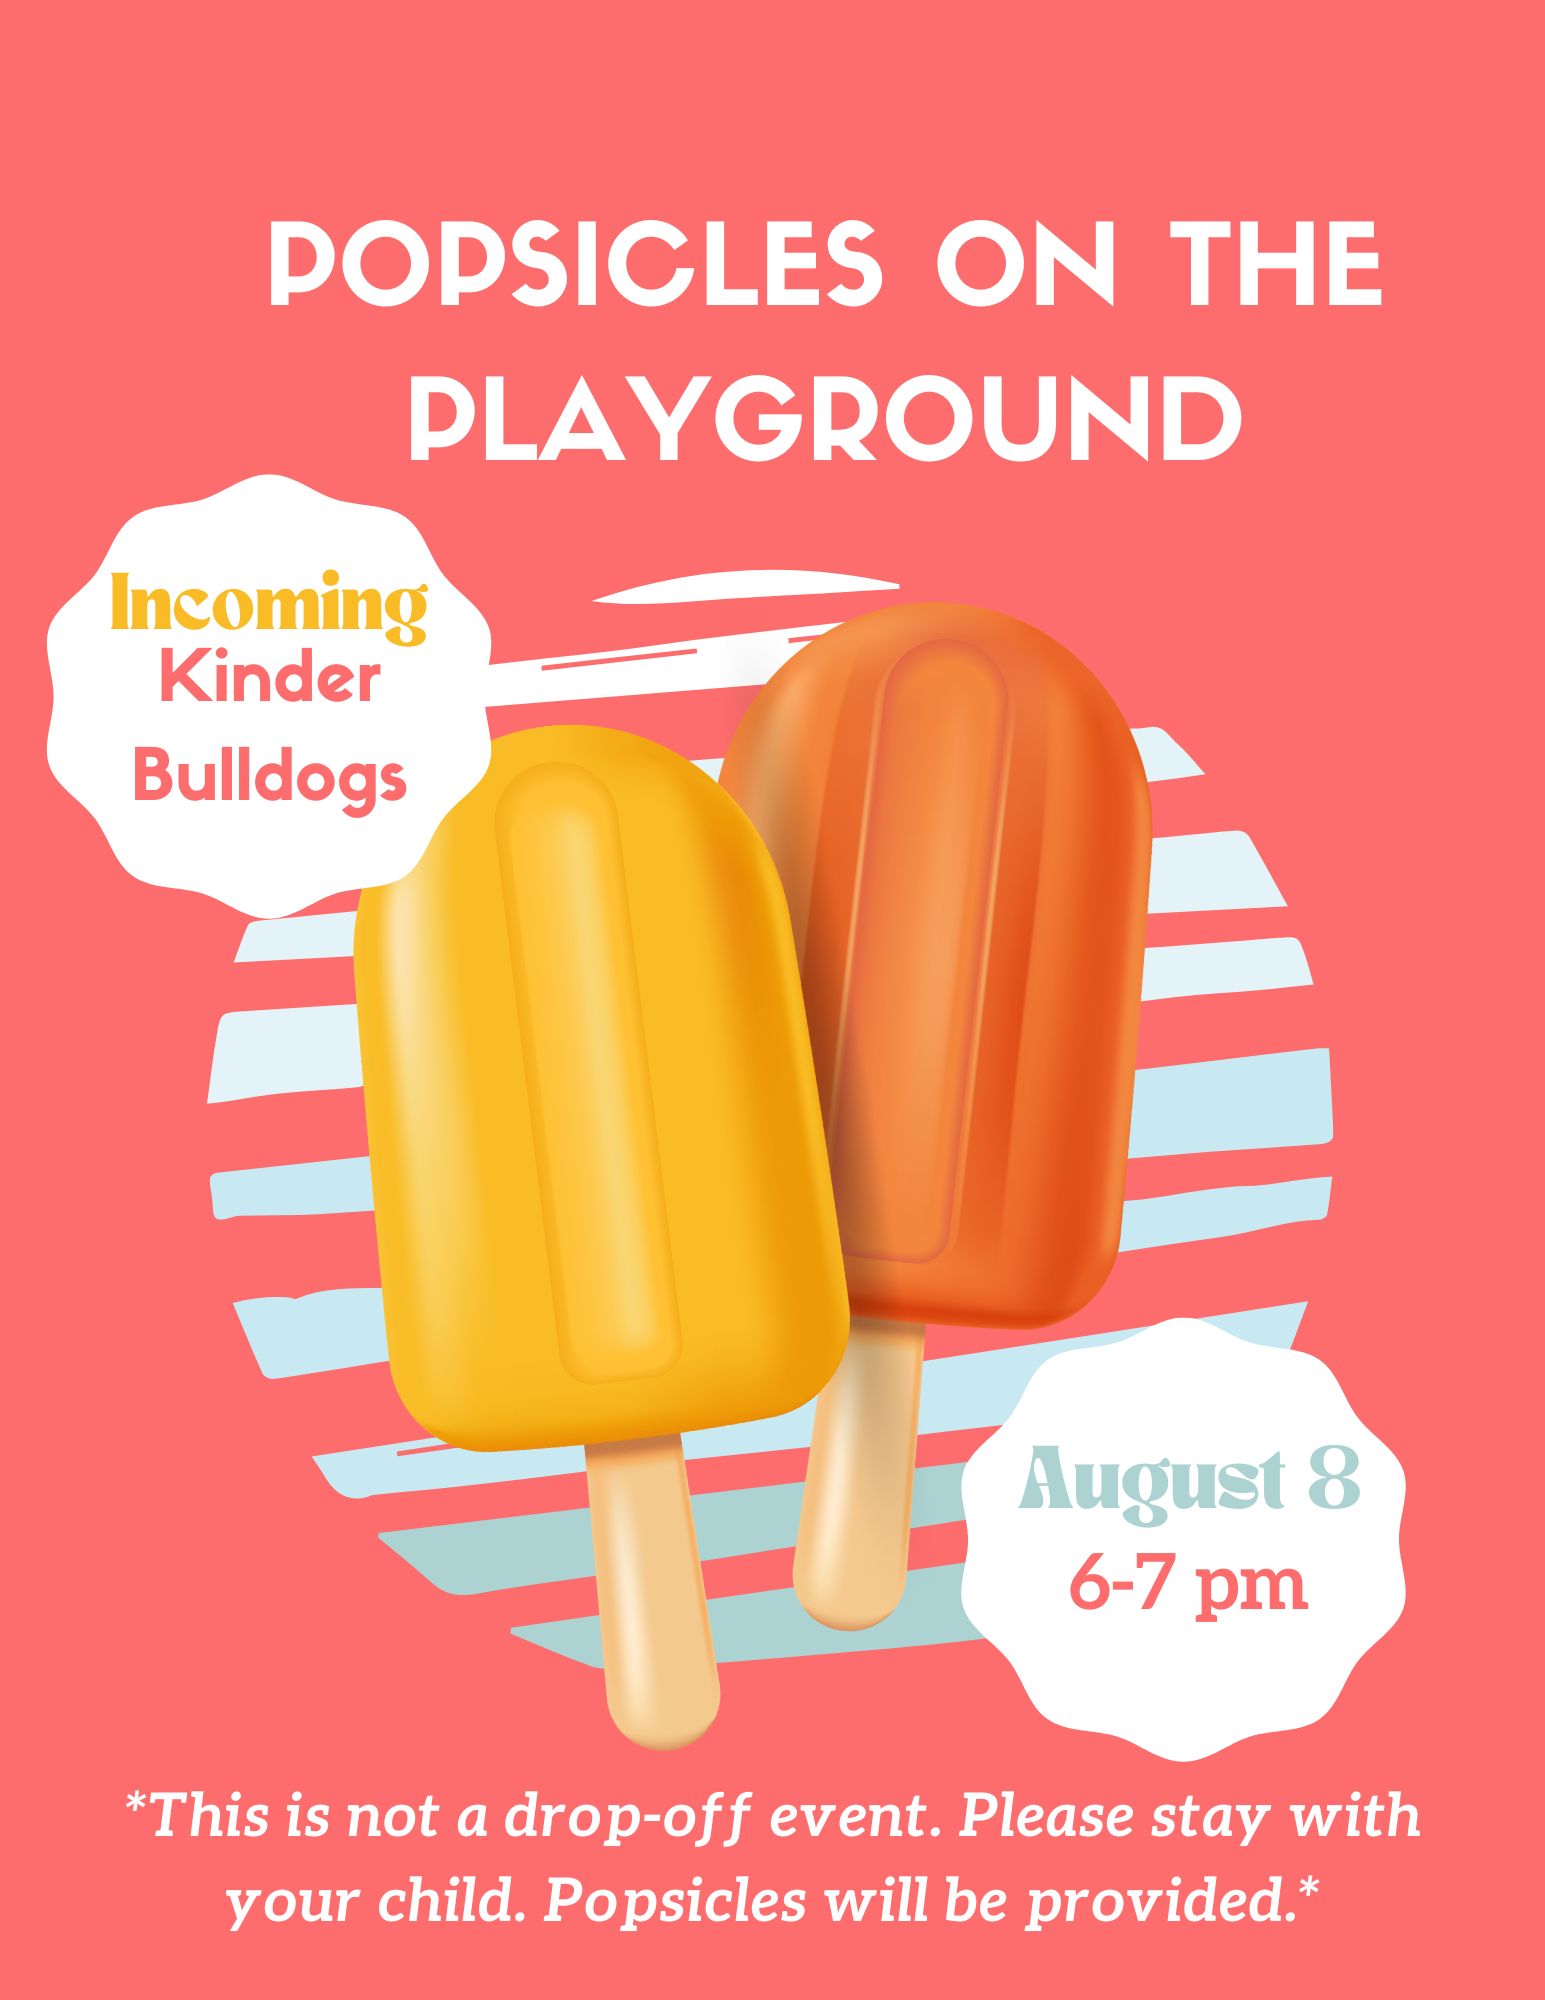 Pic of Two Popsicles with text about upcoming August 8th event for new kinder bulldogs at Helotes elementary